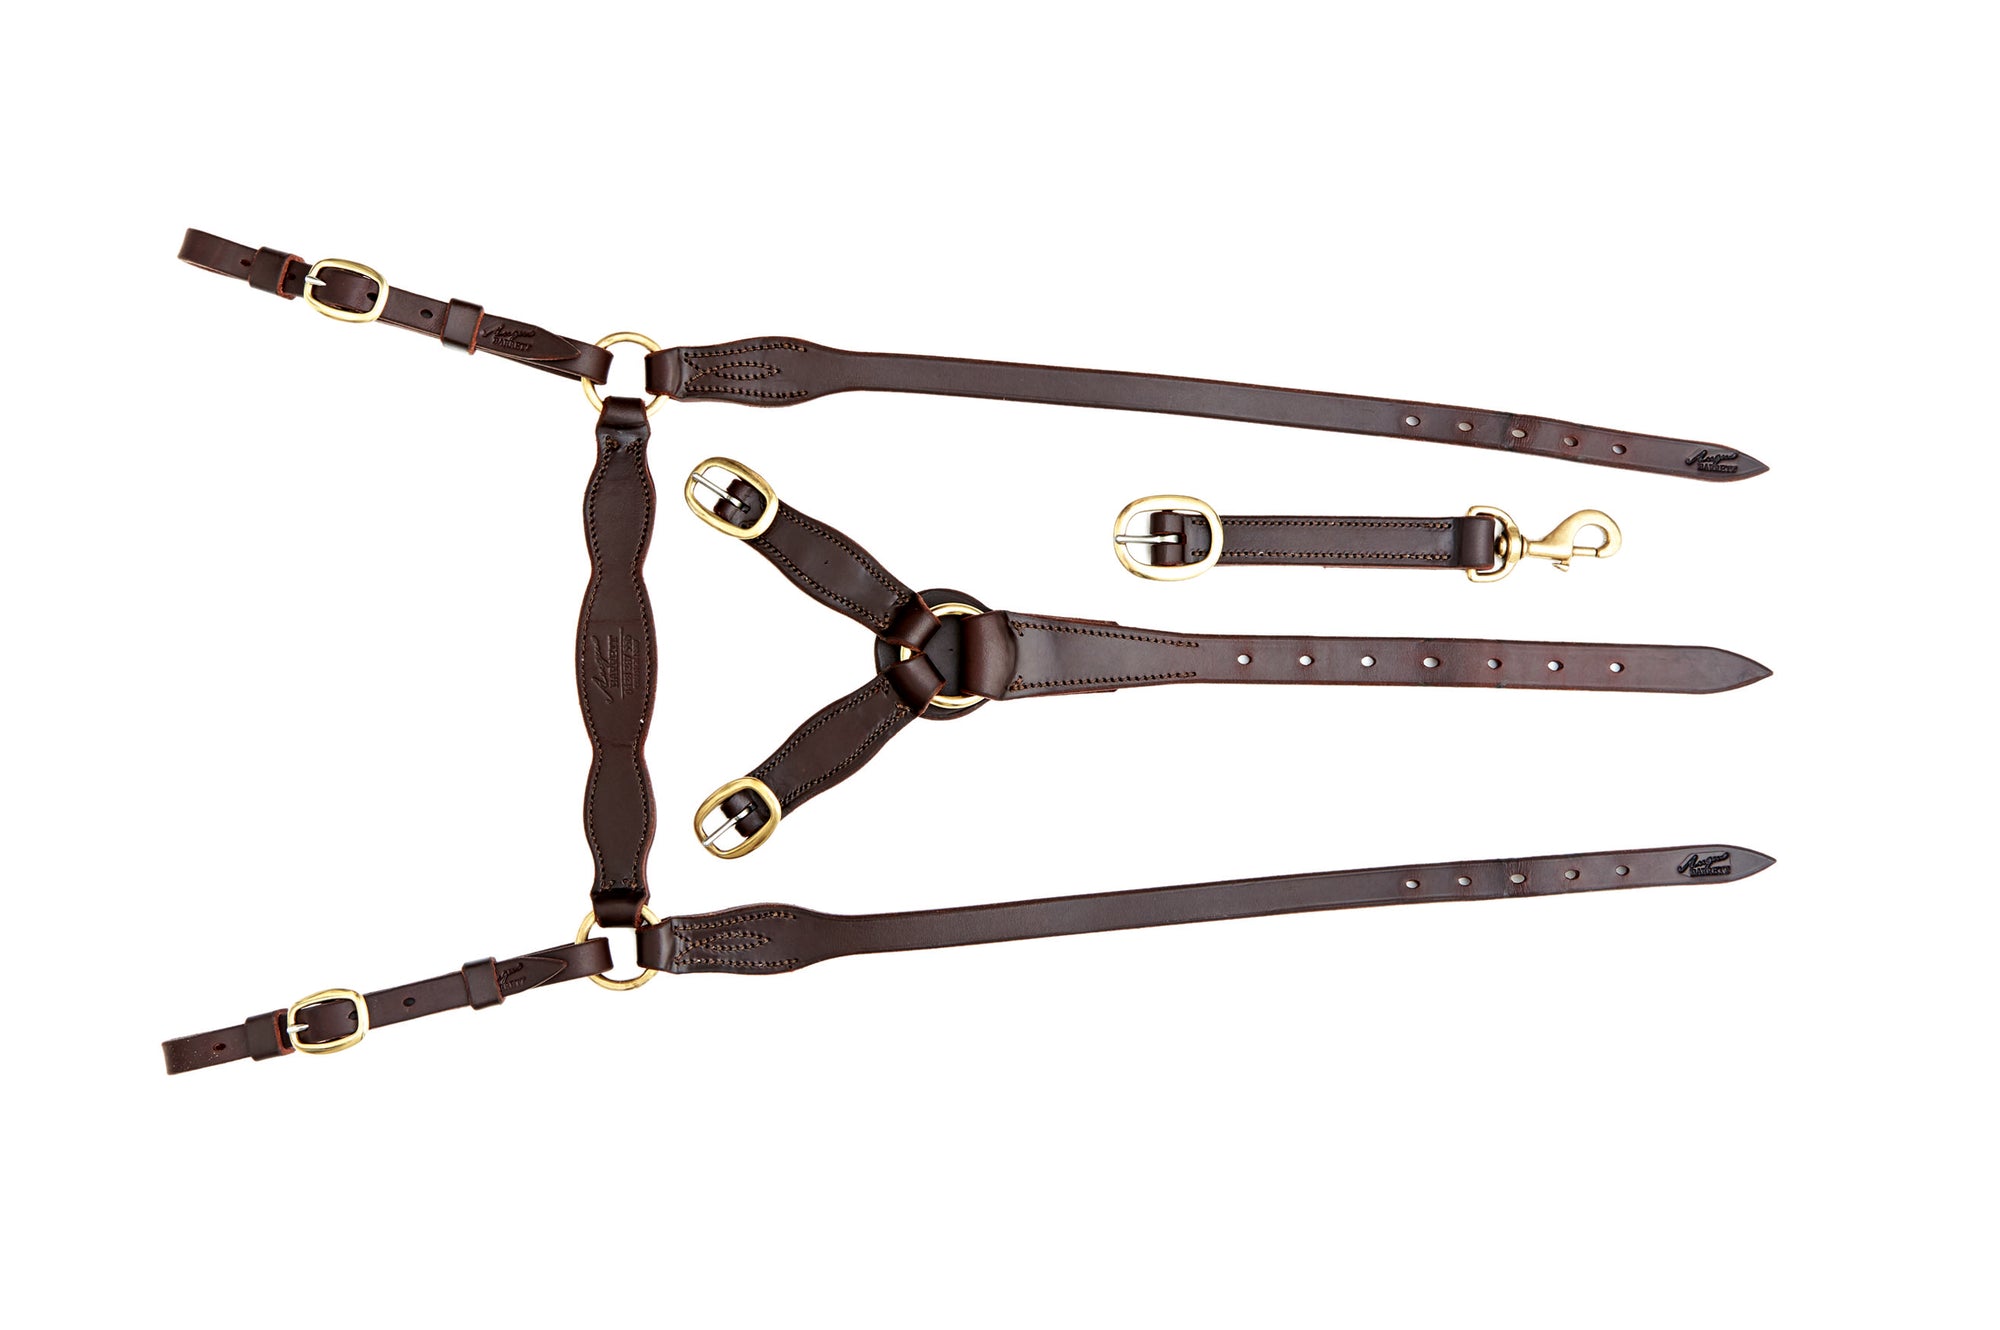 Station Breastplate - Dark Natural with stainless steel hardware | Angus Barrett Saddlery